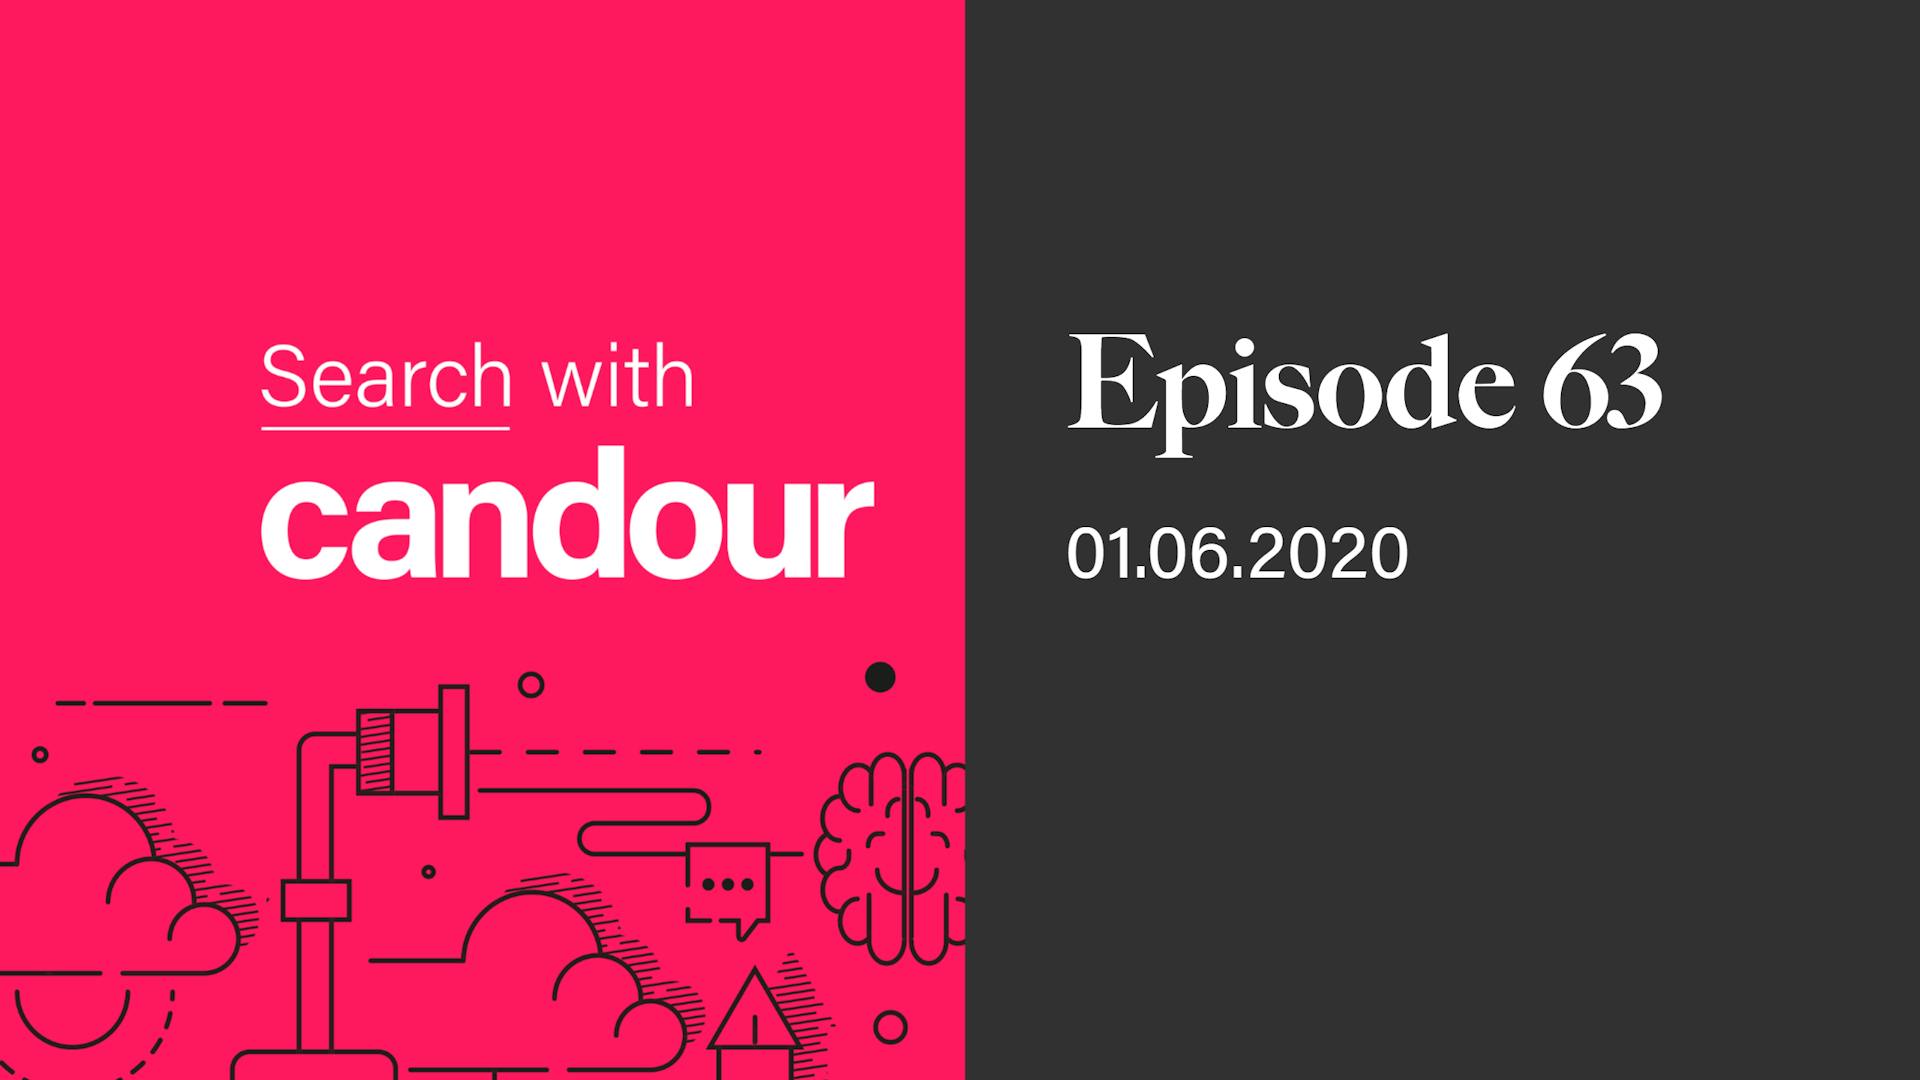 Episode 63 - Search with Candour